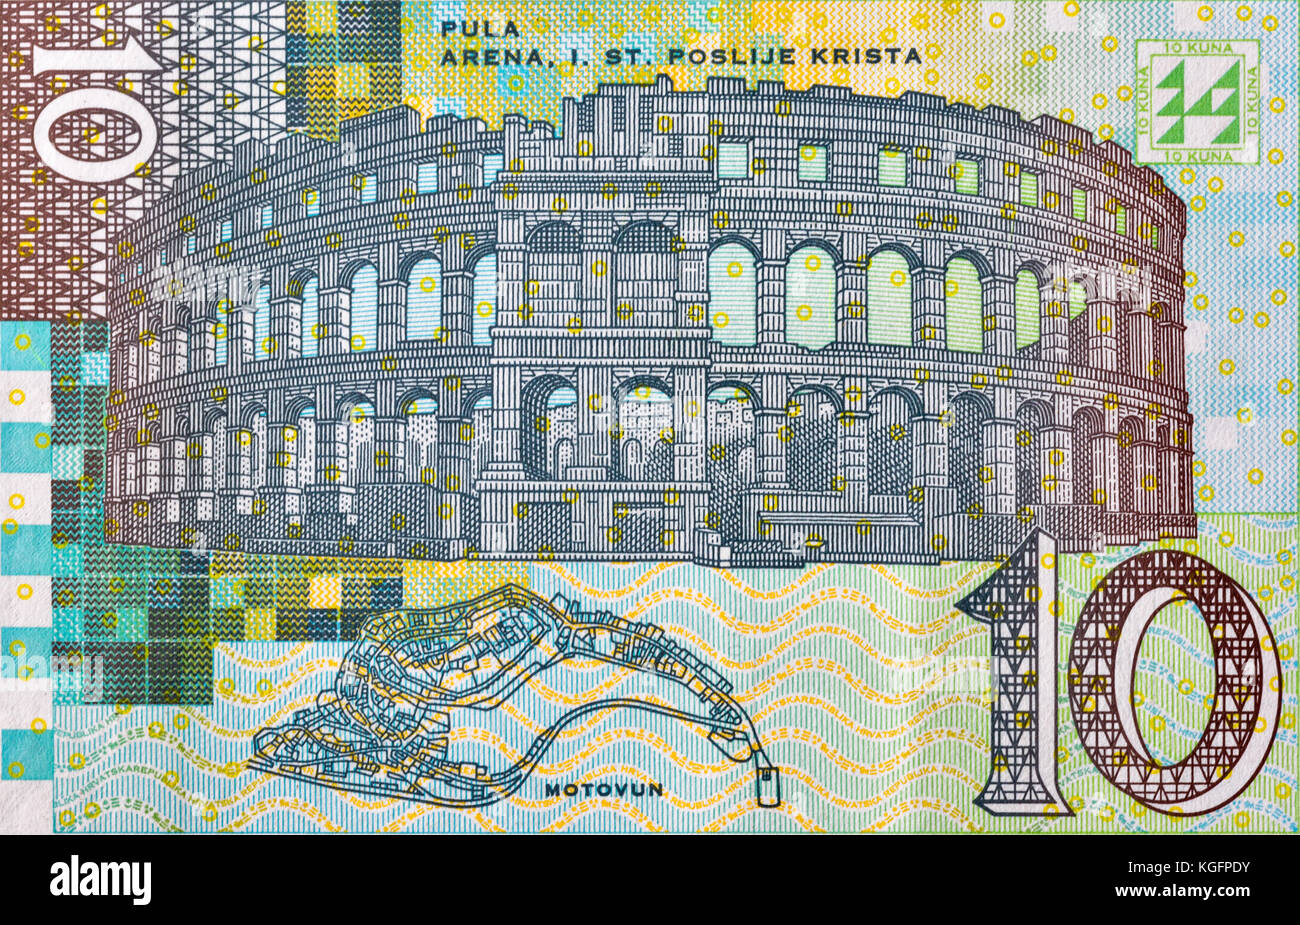 Croatian currency notes 10 Kuna banknote macro, back side. The Pula Arena and Motovun town layout. Stock Photo